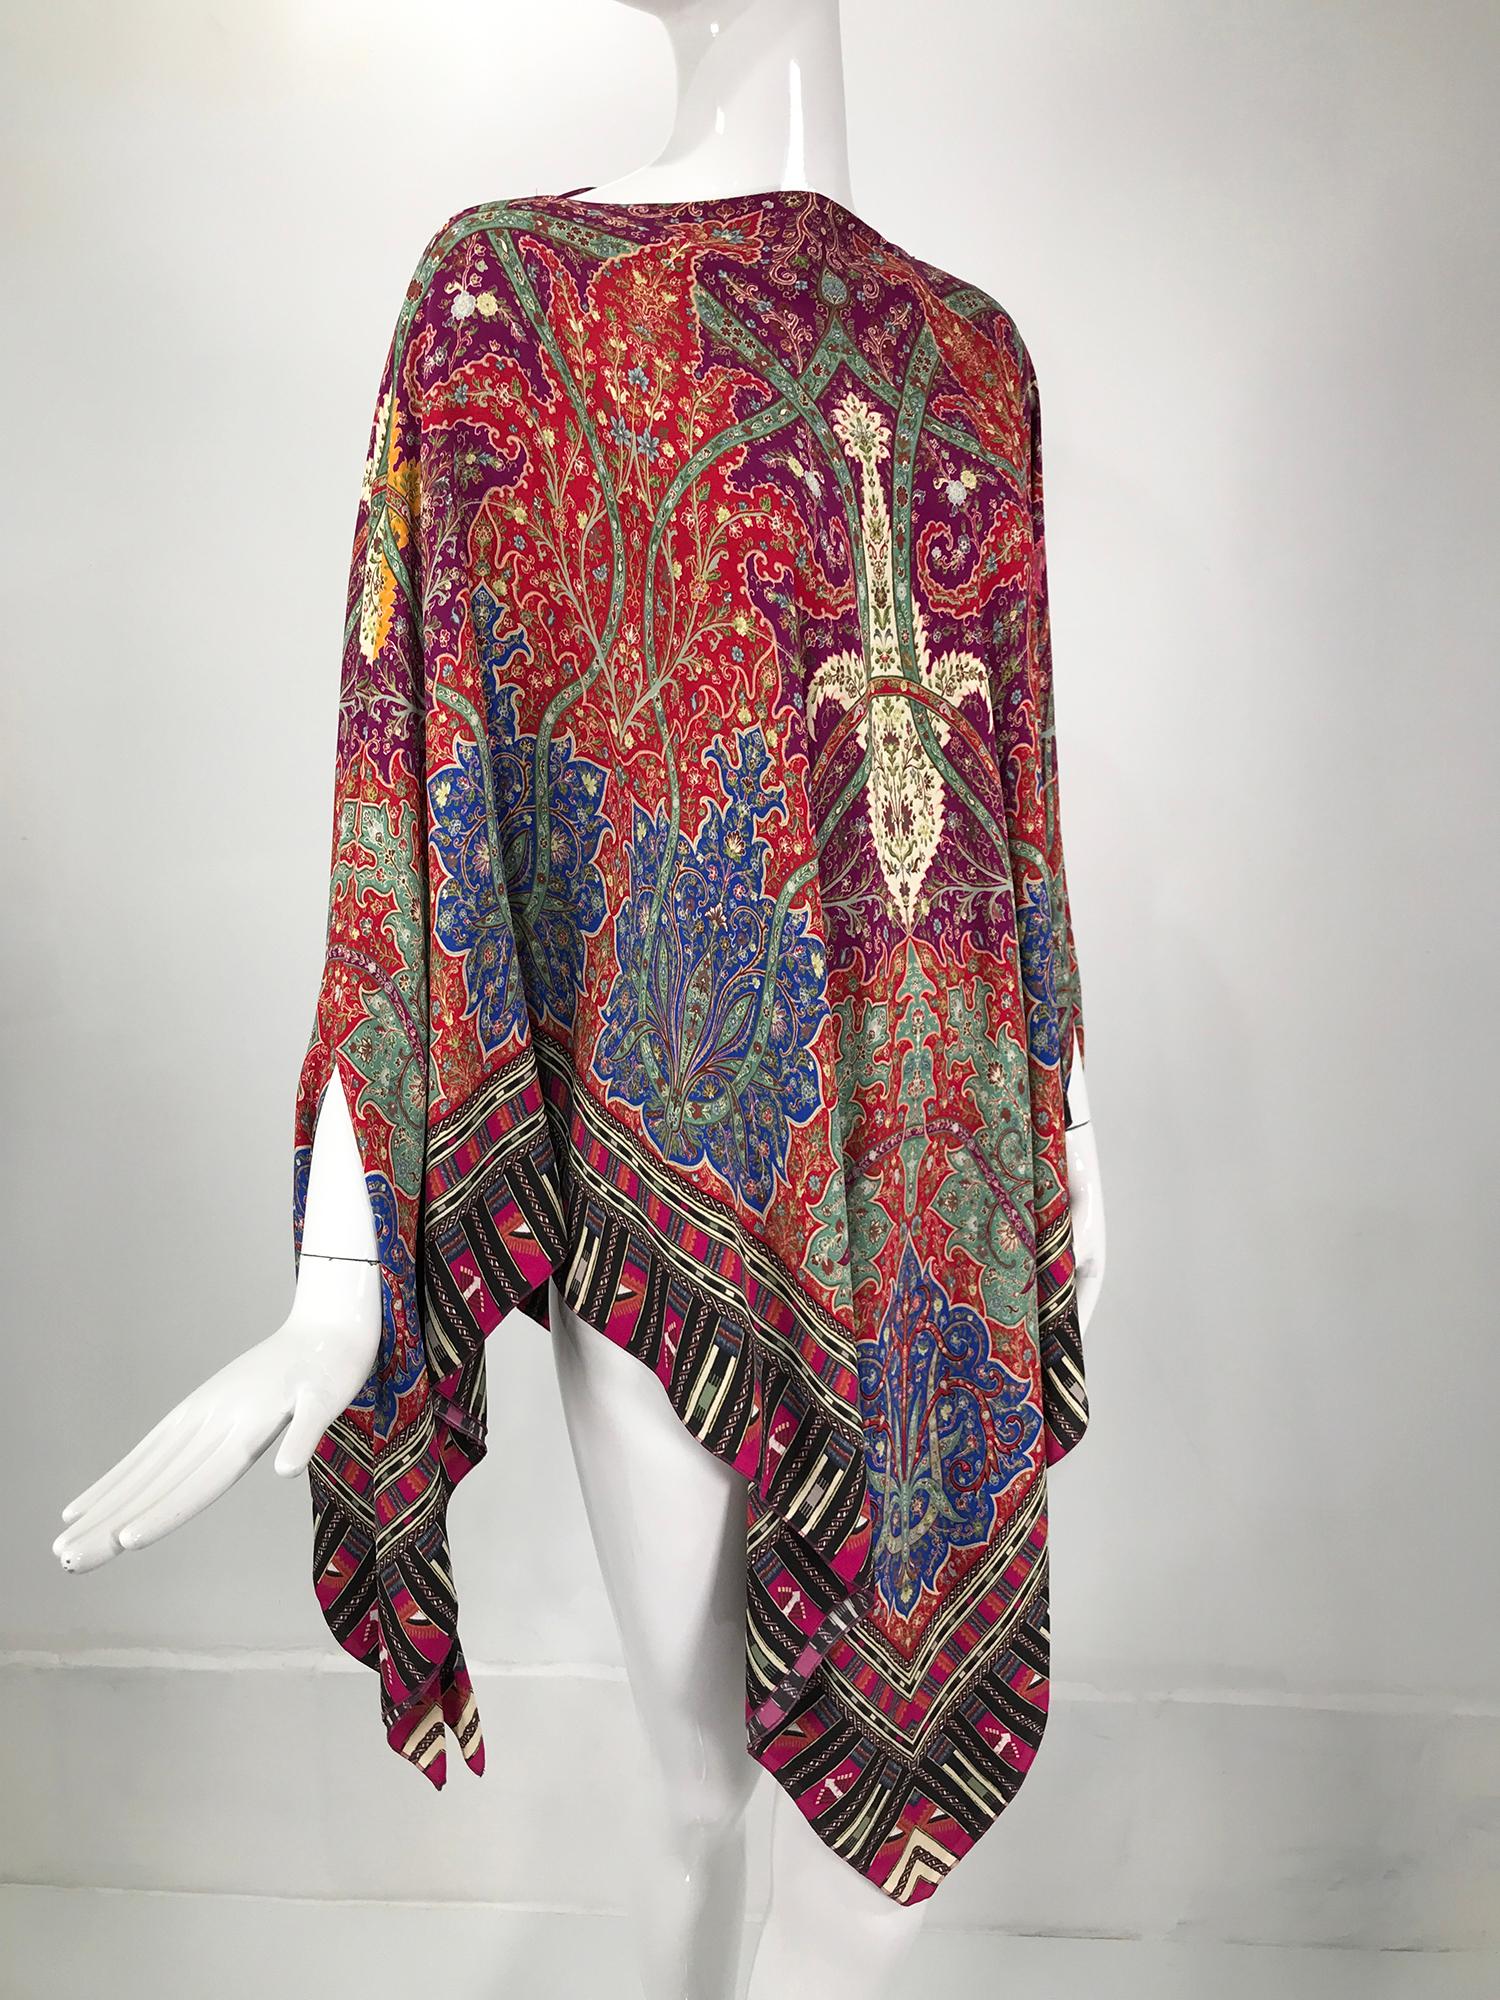 Etro paisley poncho/cape. Viscose/silk blend pull on poncho/cape, double layer fabric with interior French seaming. At the sides there are seam openings, two on each side for your arms. The fabric drapes beautifully, the print is gorgeous with lots